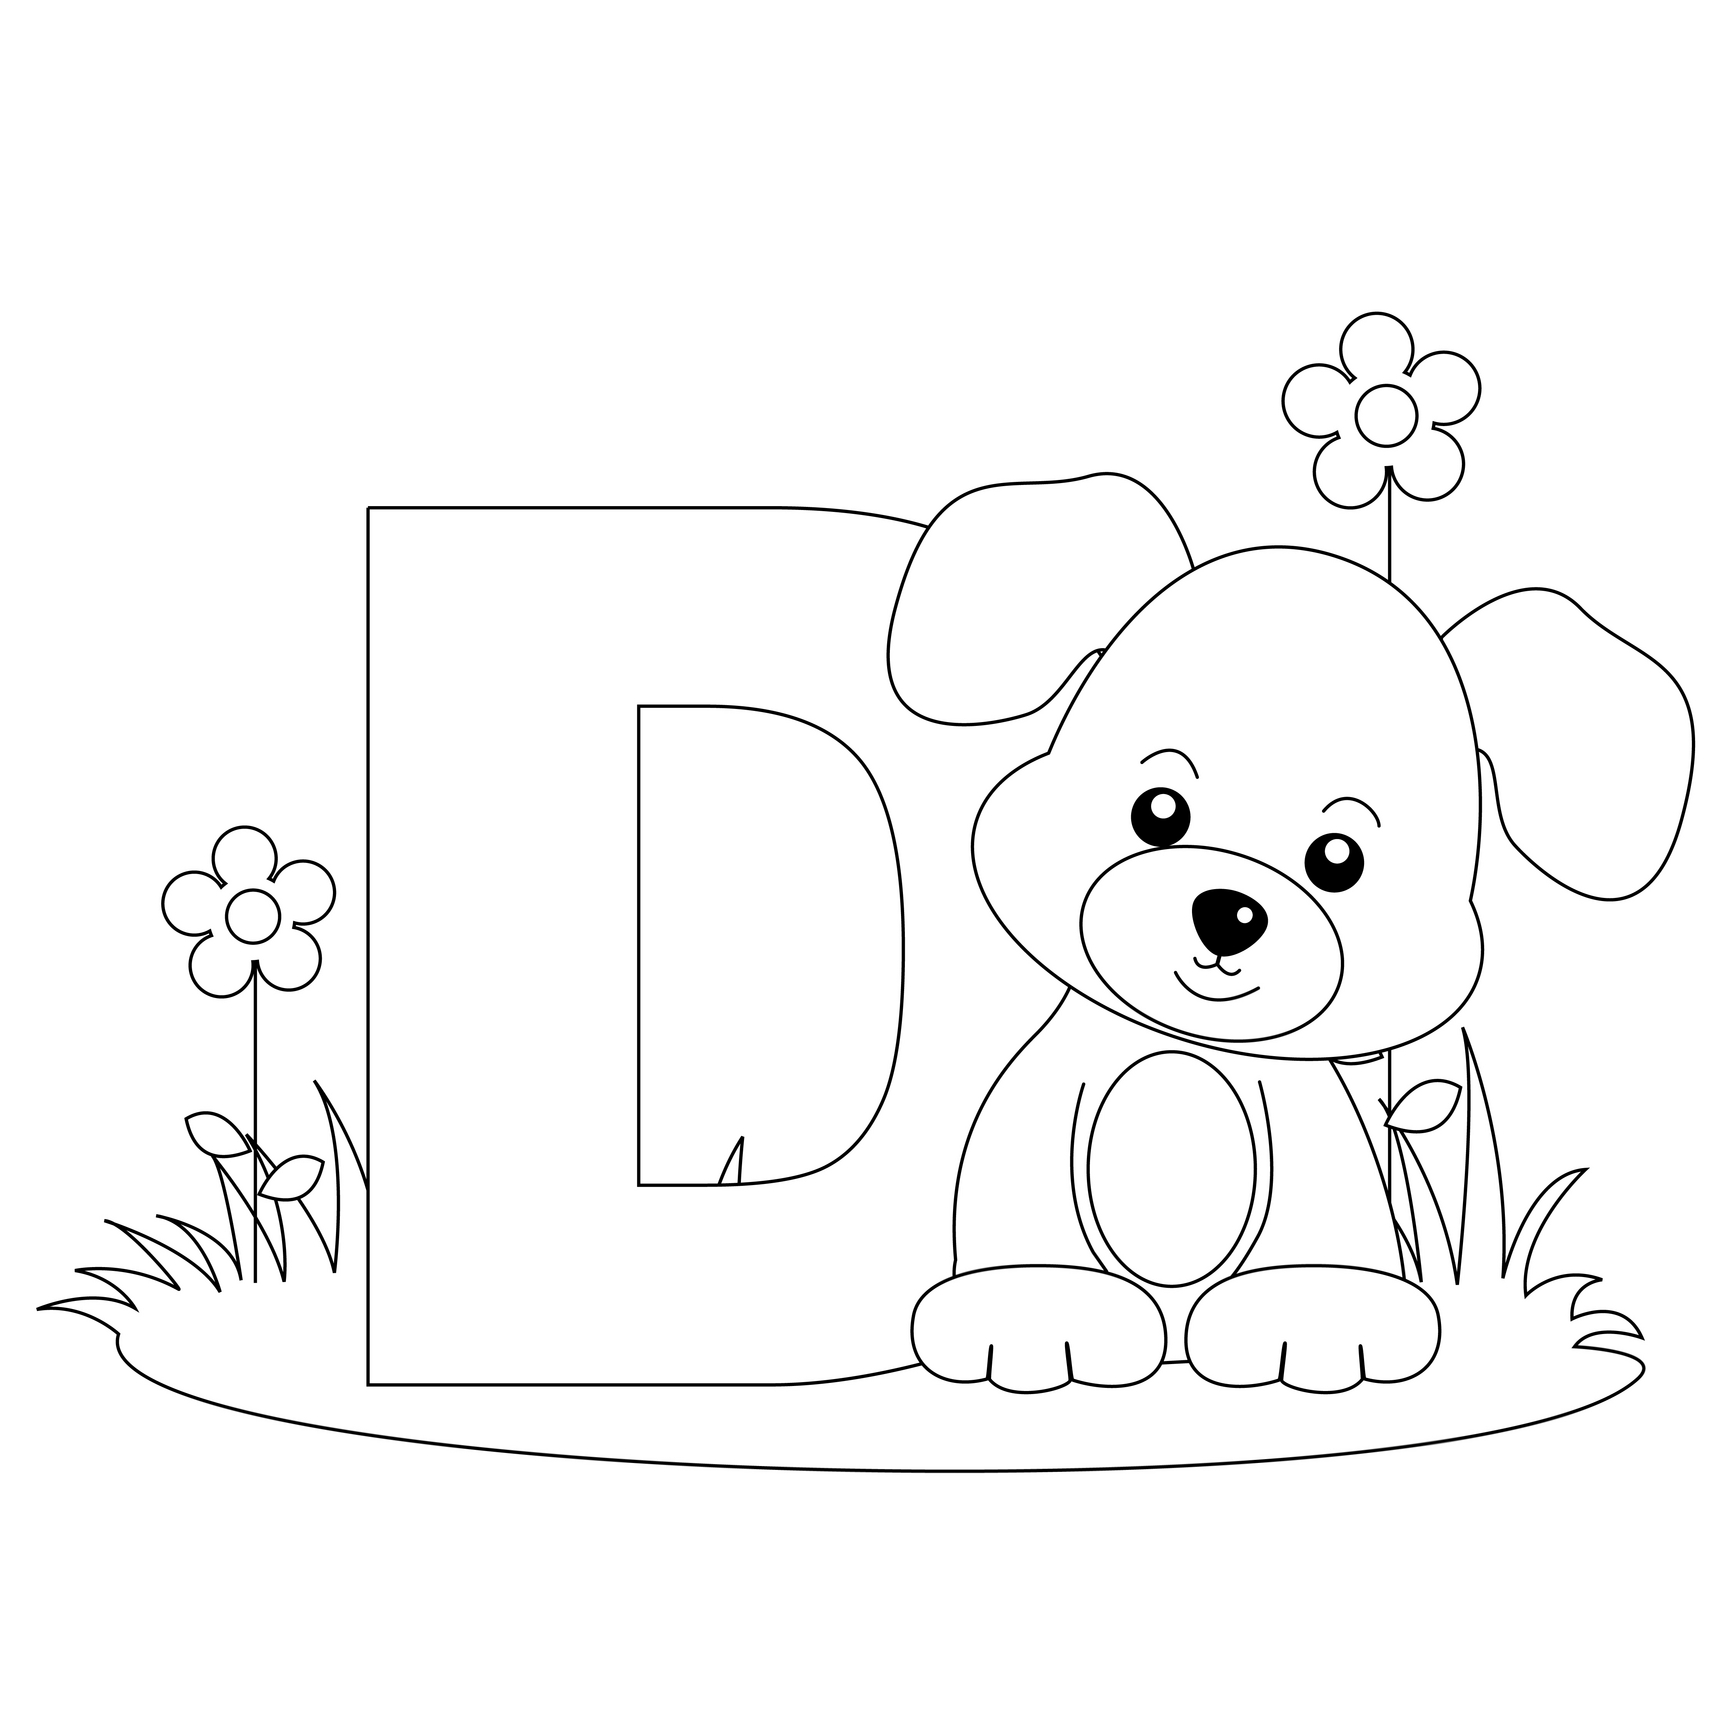 Coloring page: Alphabet (Educational) #125092 - Printable coloring pages